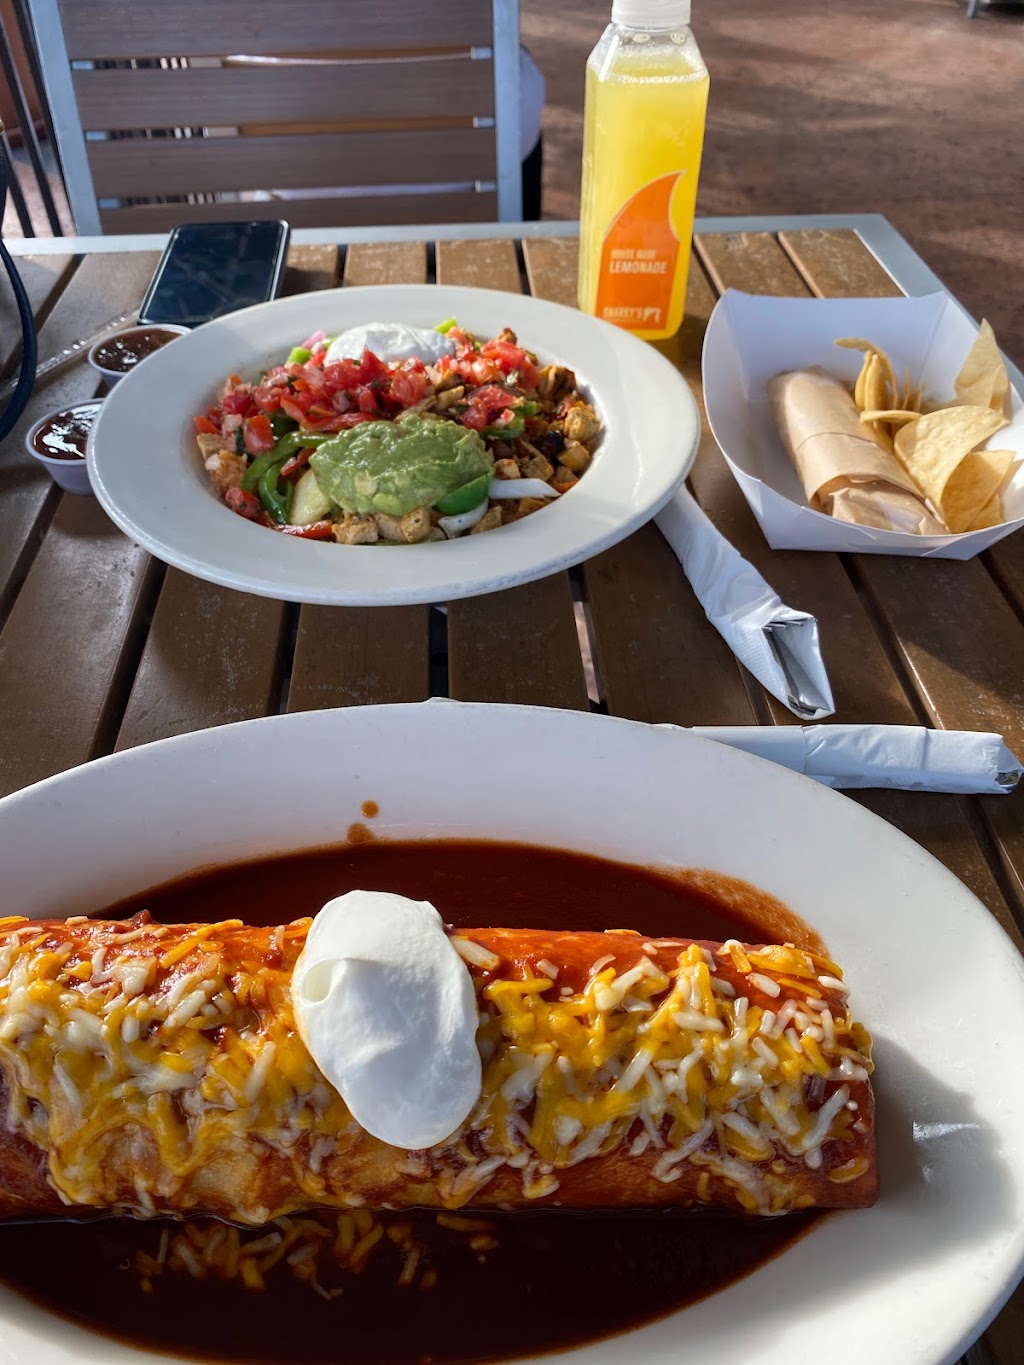 Sharkys Woodfired Mexican Grill | 20419 Devonshire St, Chatsworth, CA 91311 | Phone: (818) 886-8446